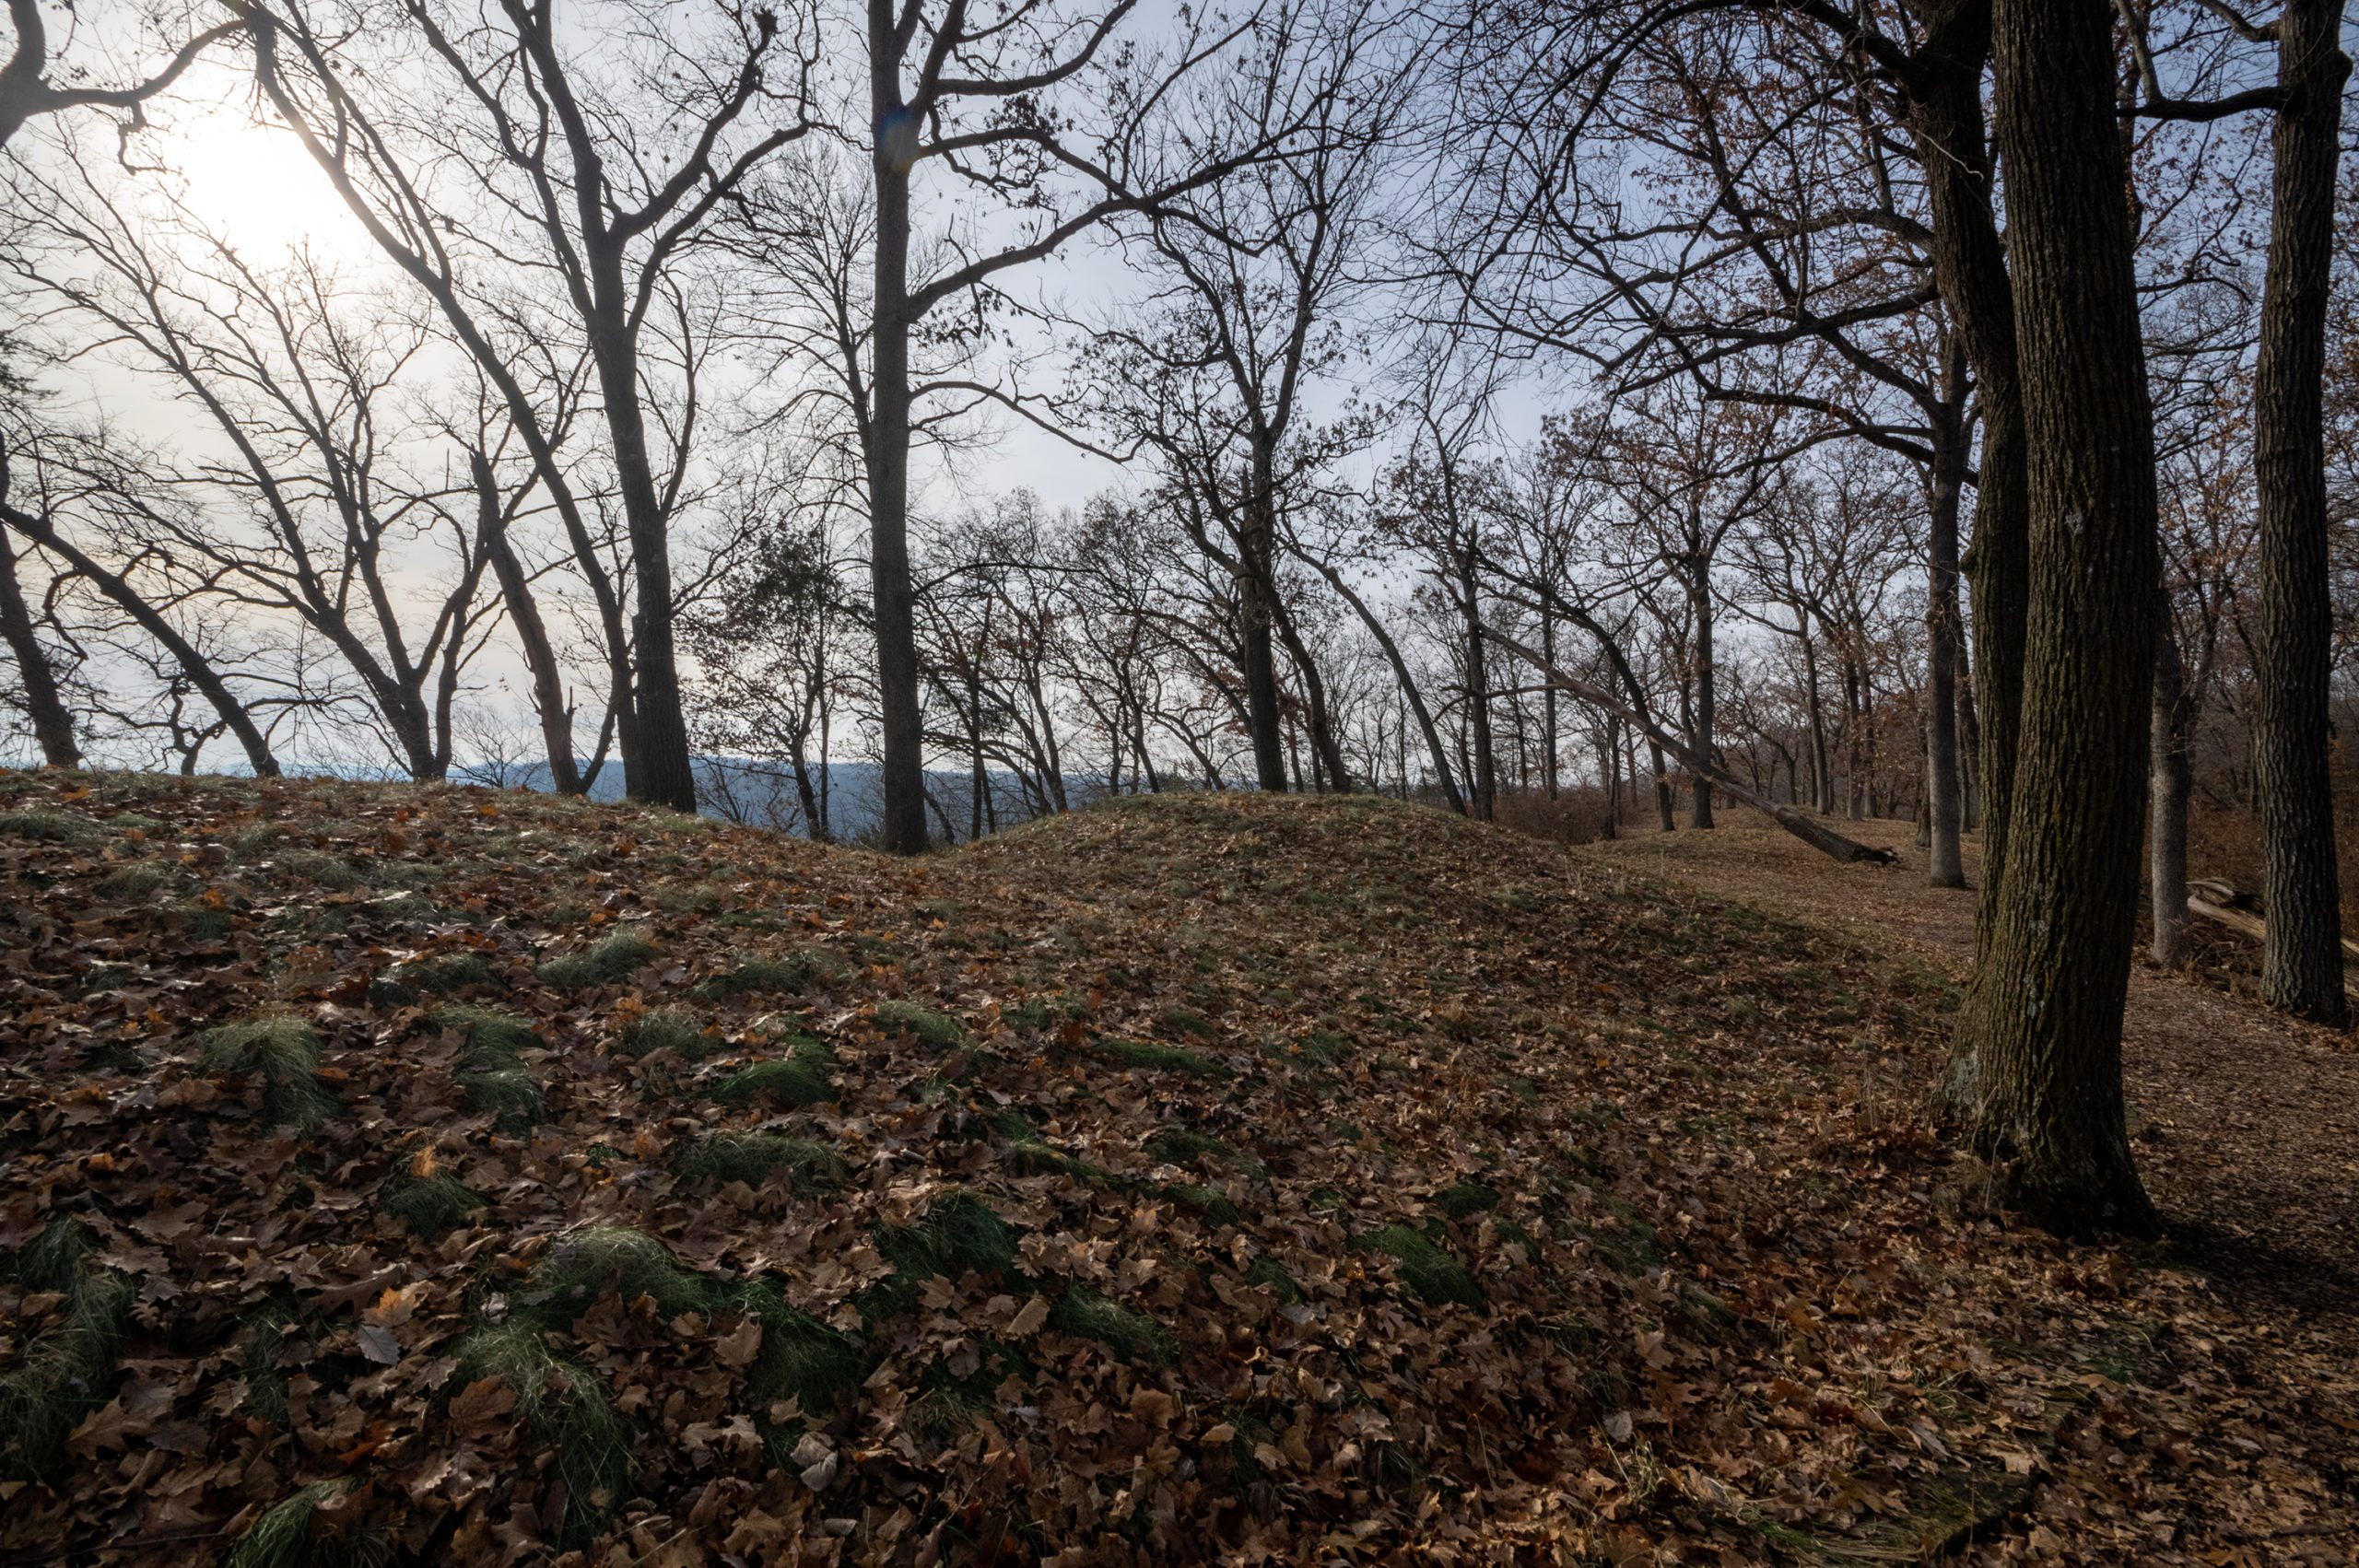 effigy mounds in the fall with brown oak leaves on the ground